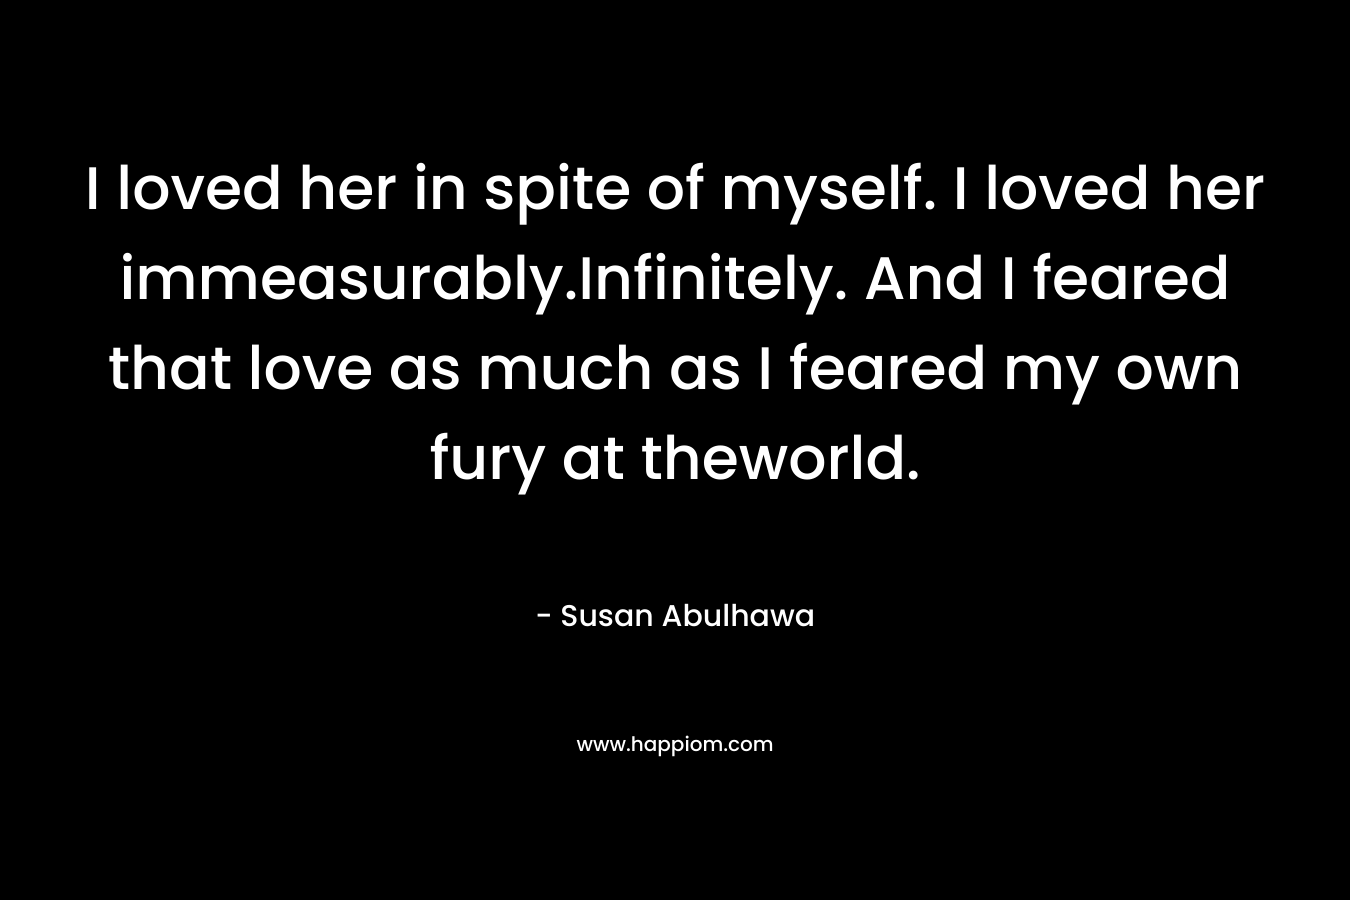 I loved her in spite of myself. I loved her immeasurably.Infinitely. And I feared that love as much as I feared my own fury at theworld.